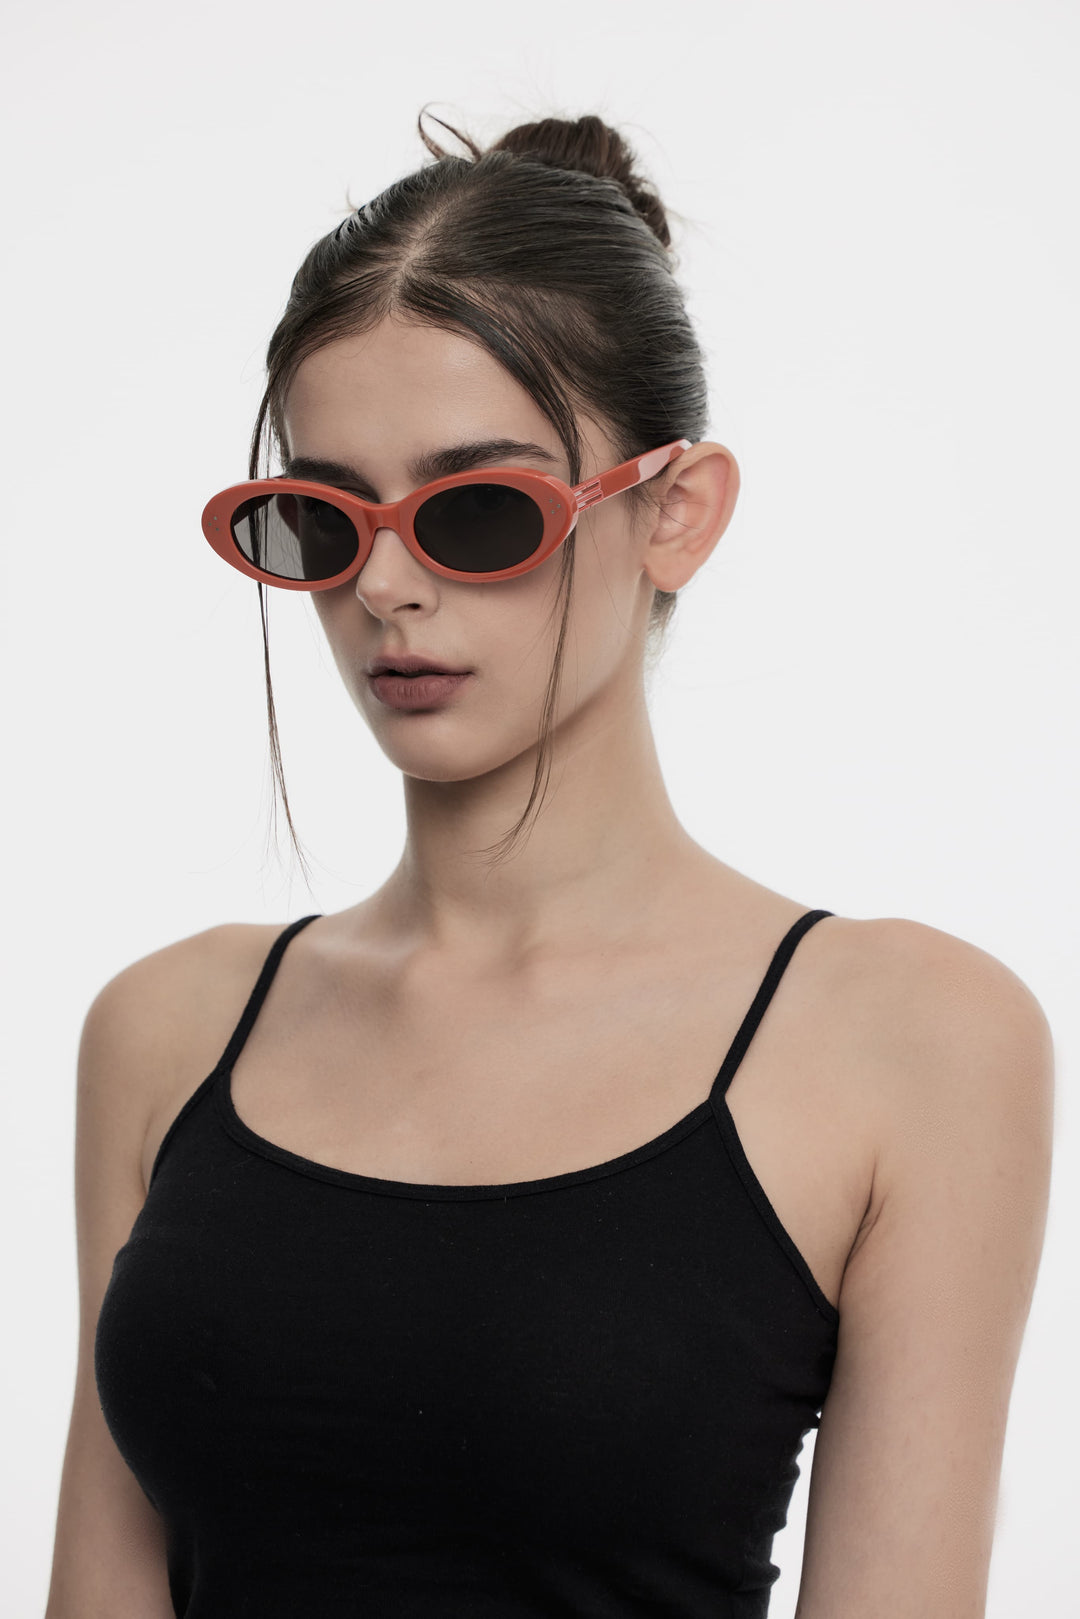 Model of her side face looking down wearing Wave in red round Kpop Sunglasses from Mercury Retrograde Burr Puzzle Collection 